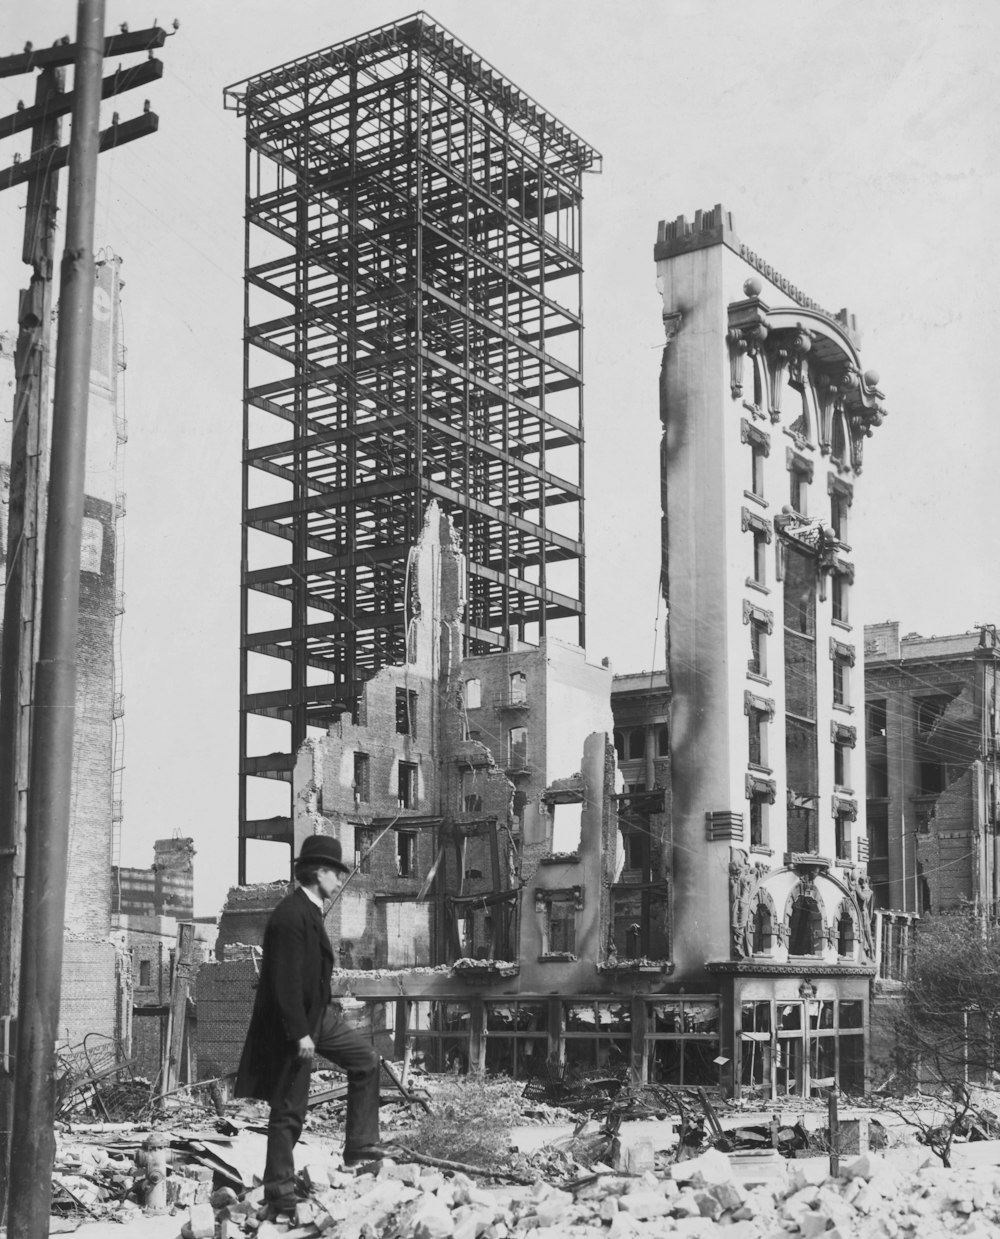 Unfinished steel structure intact after quake, San Francisco Summary Photo shows the San Francisco earthquake and fire disaster with a man standing among rubble in foreground and an unfinished but intact steel structure in background and remnants of burned out brick and stone buildings nearby 